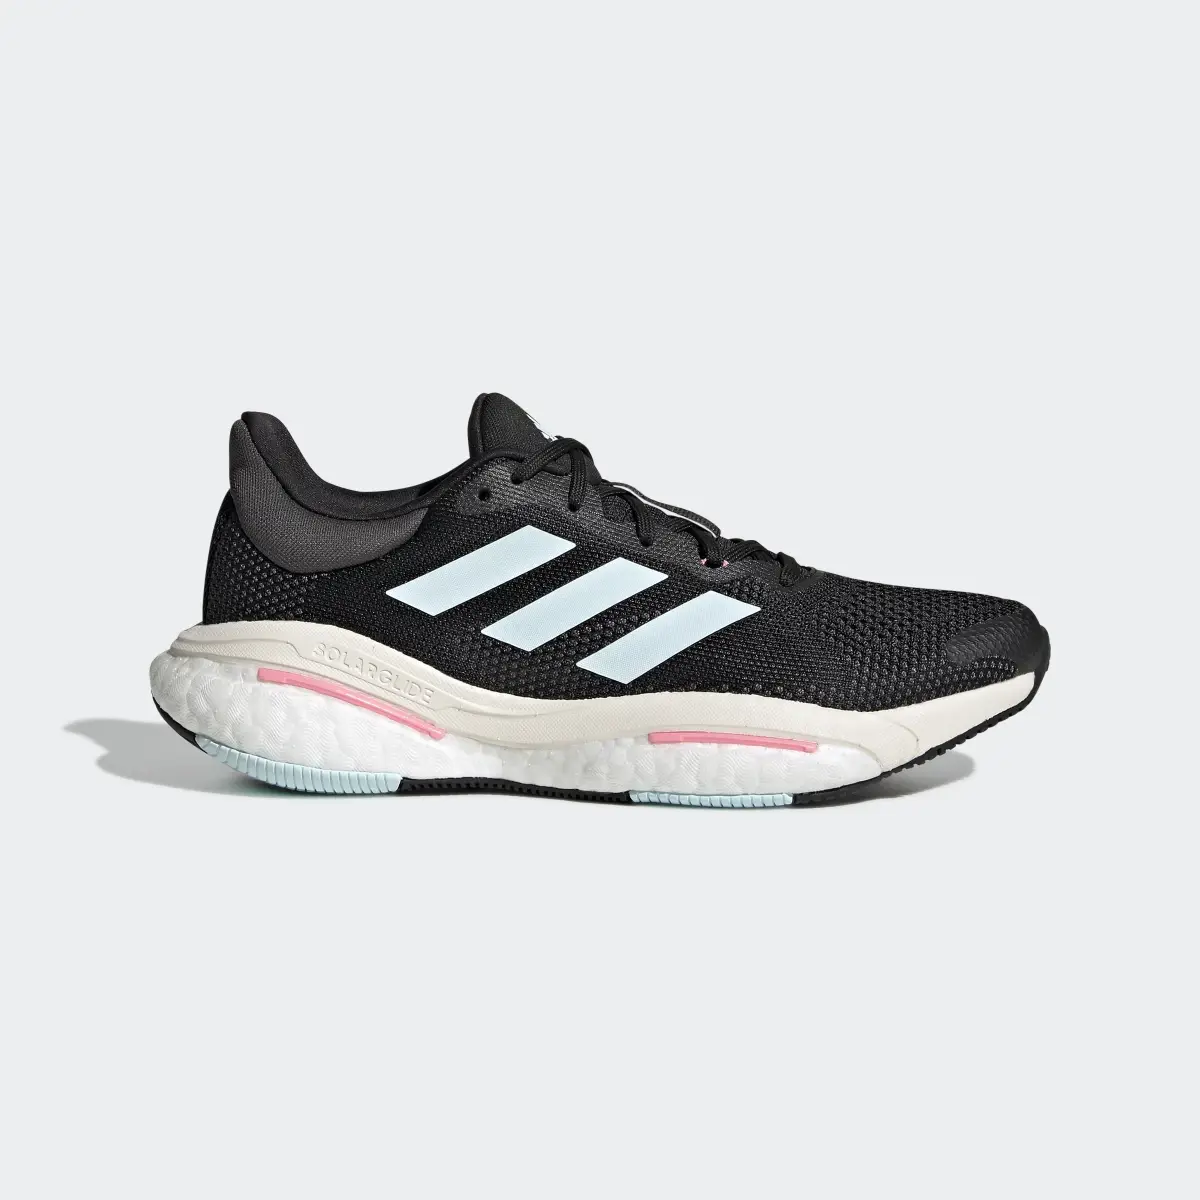 Adidas Solarglide 5 Running Shoes. 2